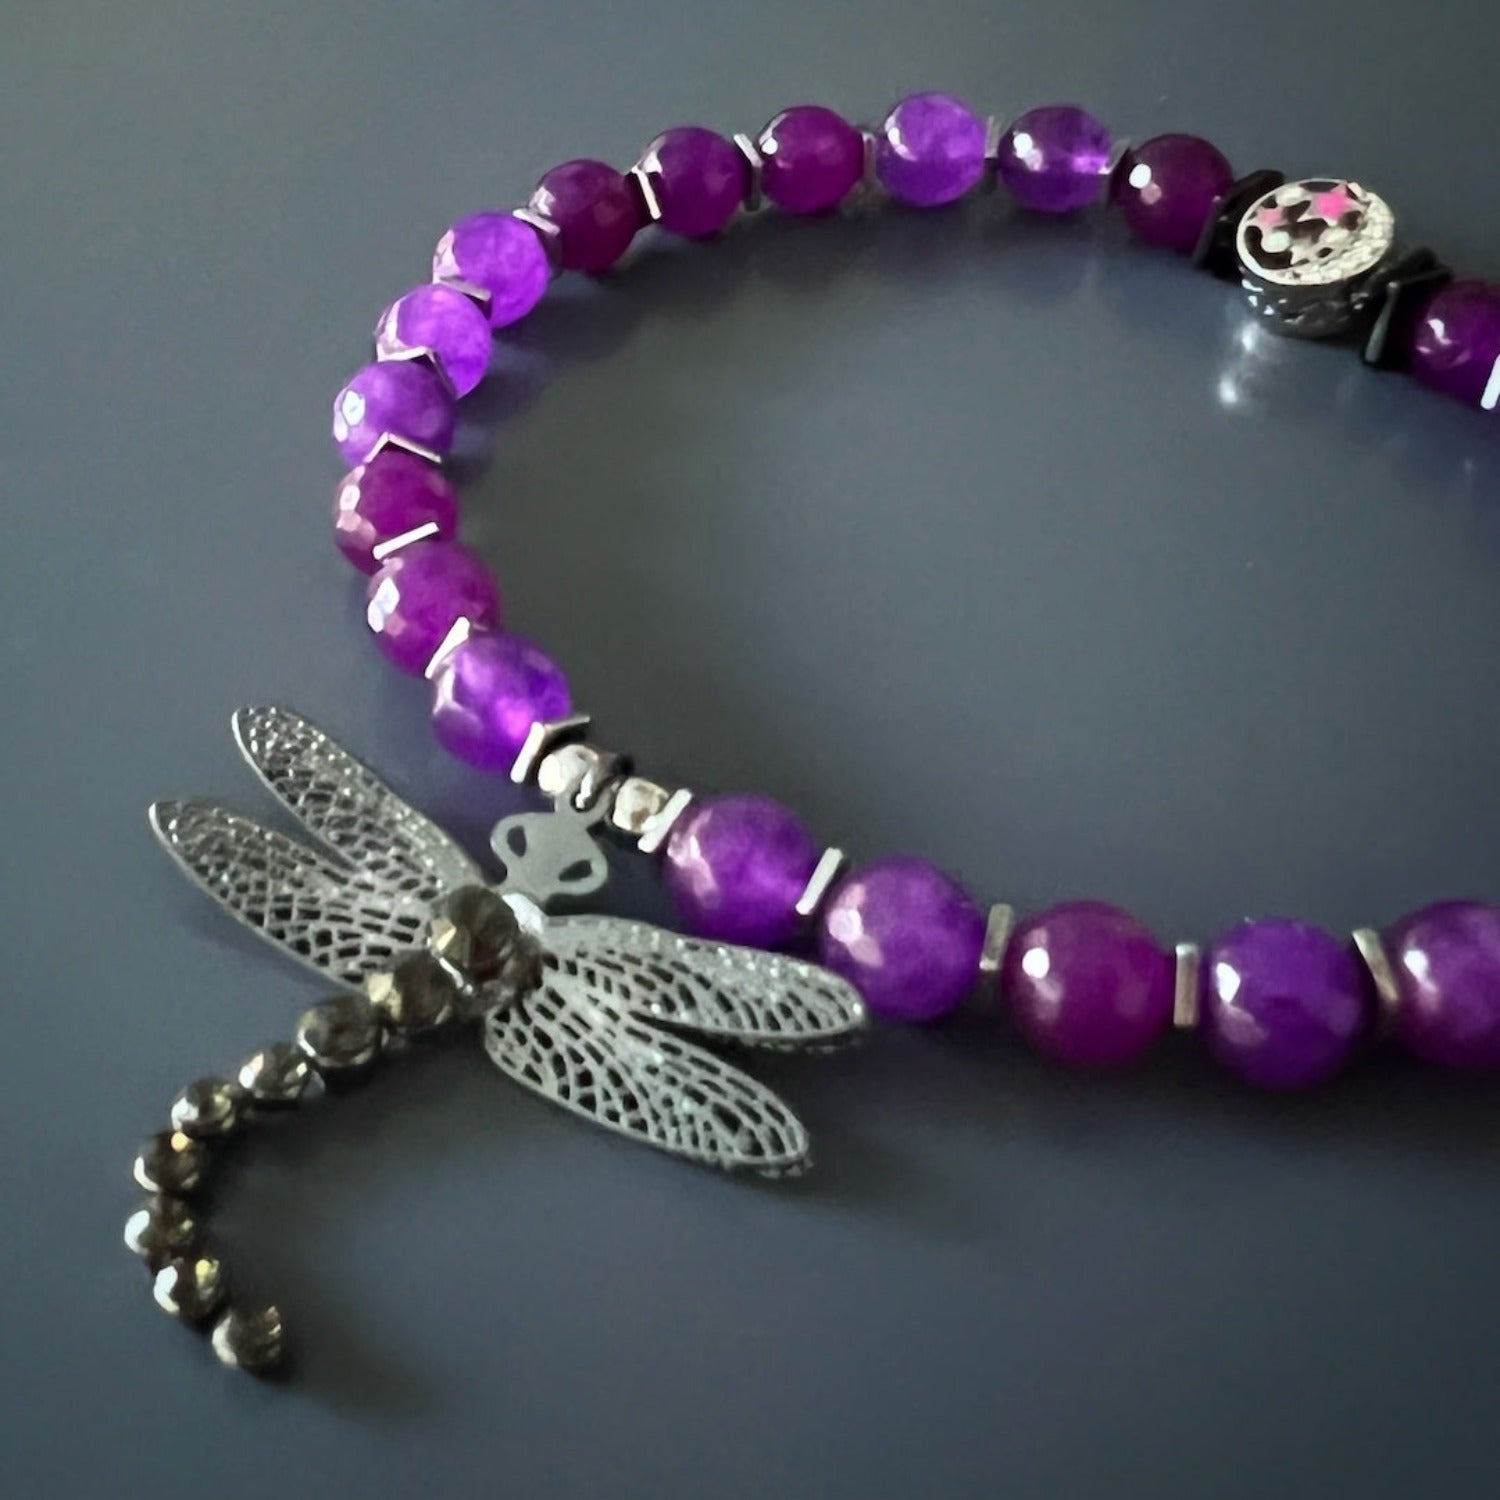 Handmade Dragonfly Ankle Bracelet showcasing the beauty of jade and the symbolic power of the dragonfly.